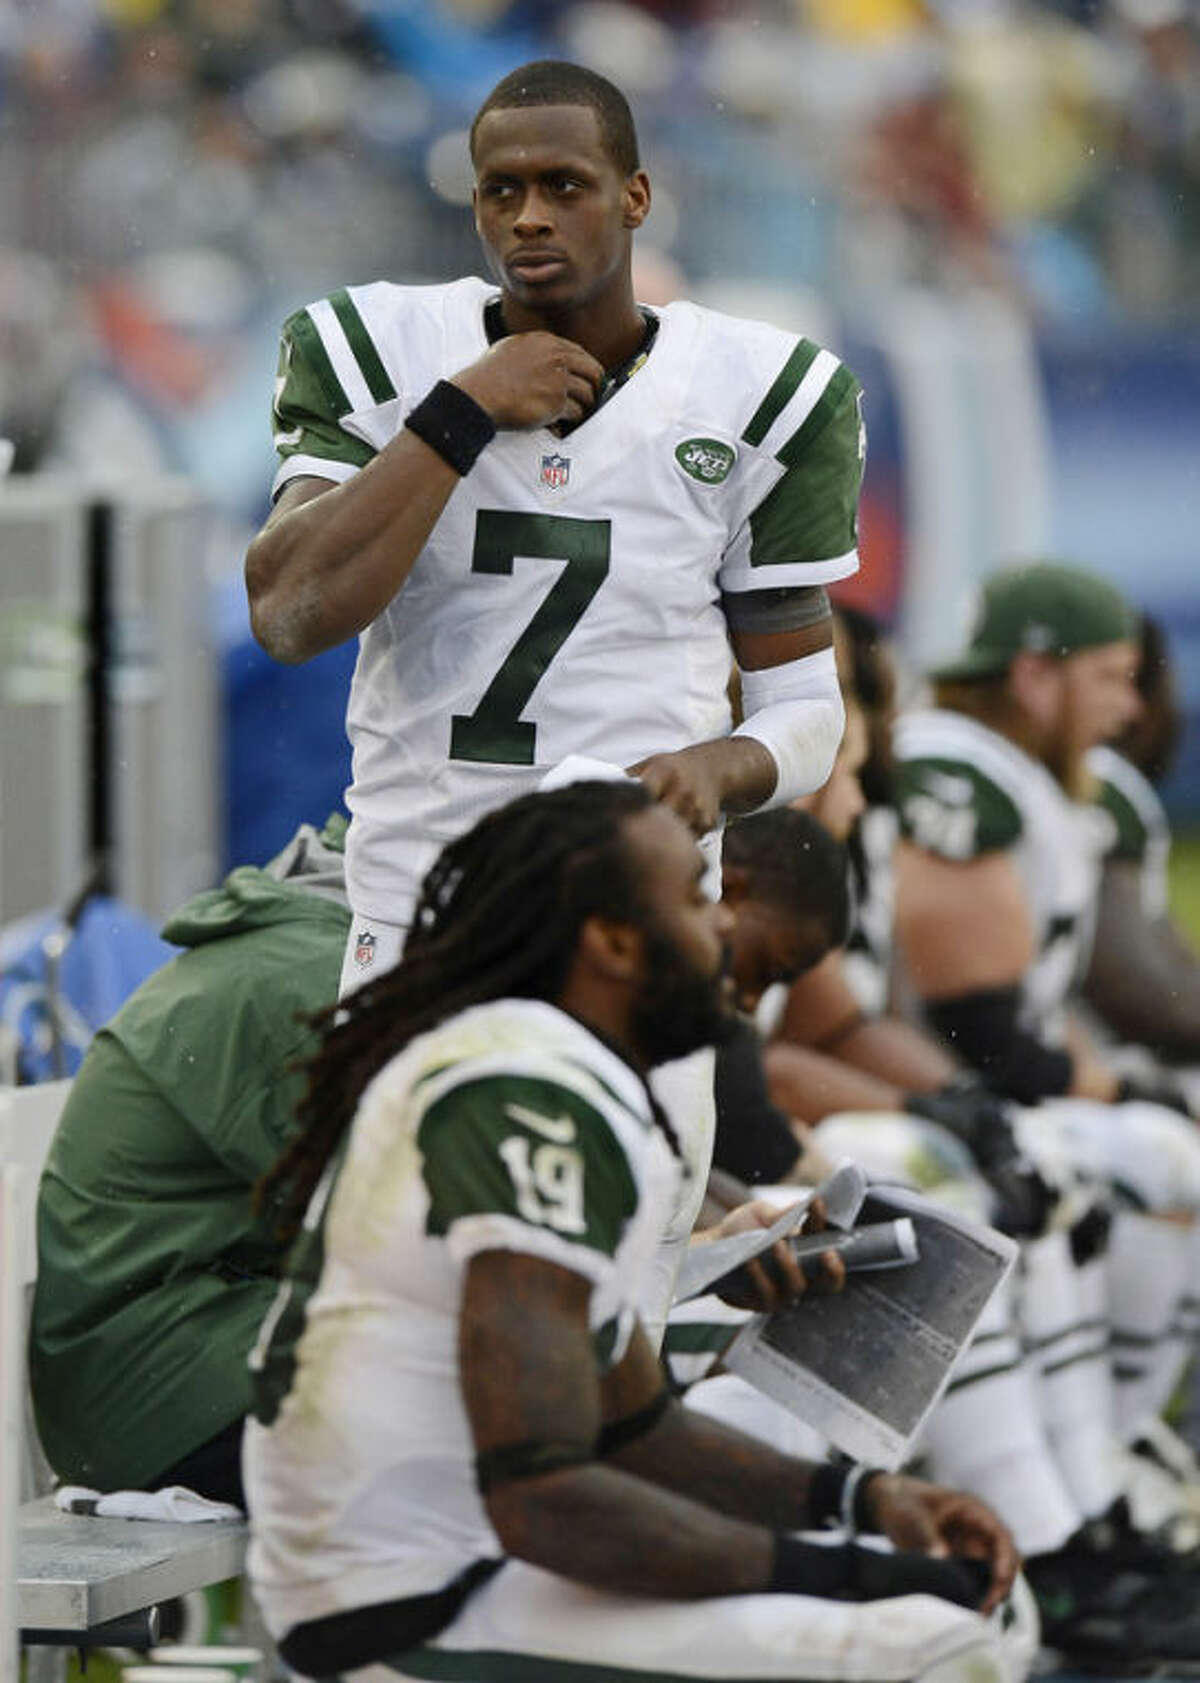 New York Jets quarterback Geno Smith (7) walks on the sideline in the fourth quarter of an NFL football game against the Tennessee Titans on Sunday, Sept. 29, 2013, in Nashville, Tenn. The Titans won 38-13. (AP Photo/Mark Zaleski)